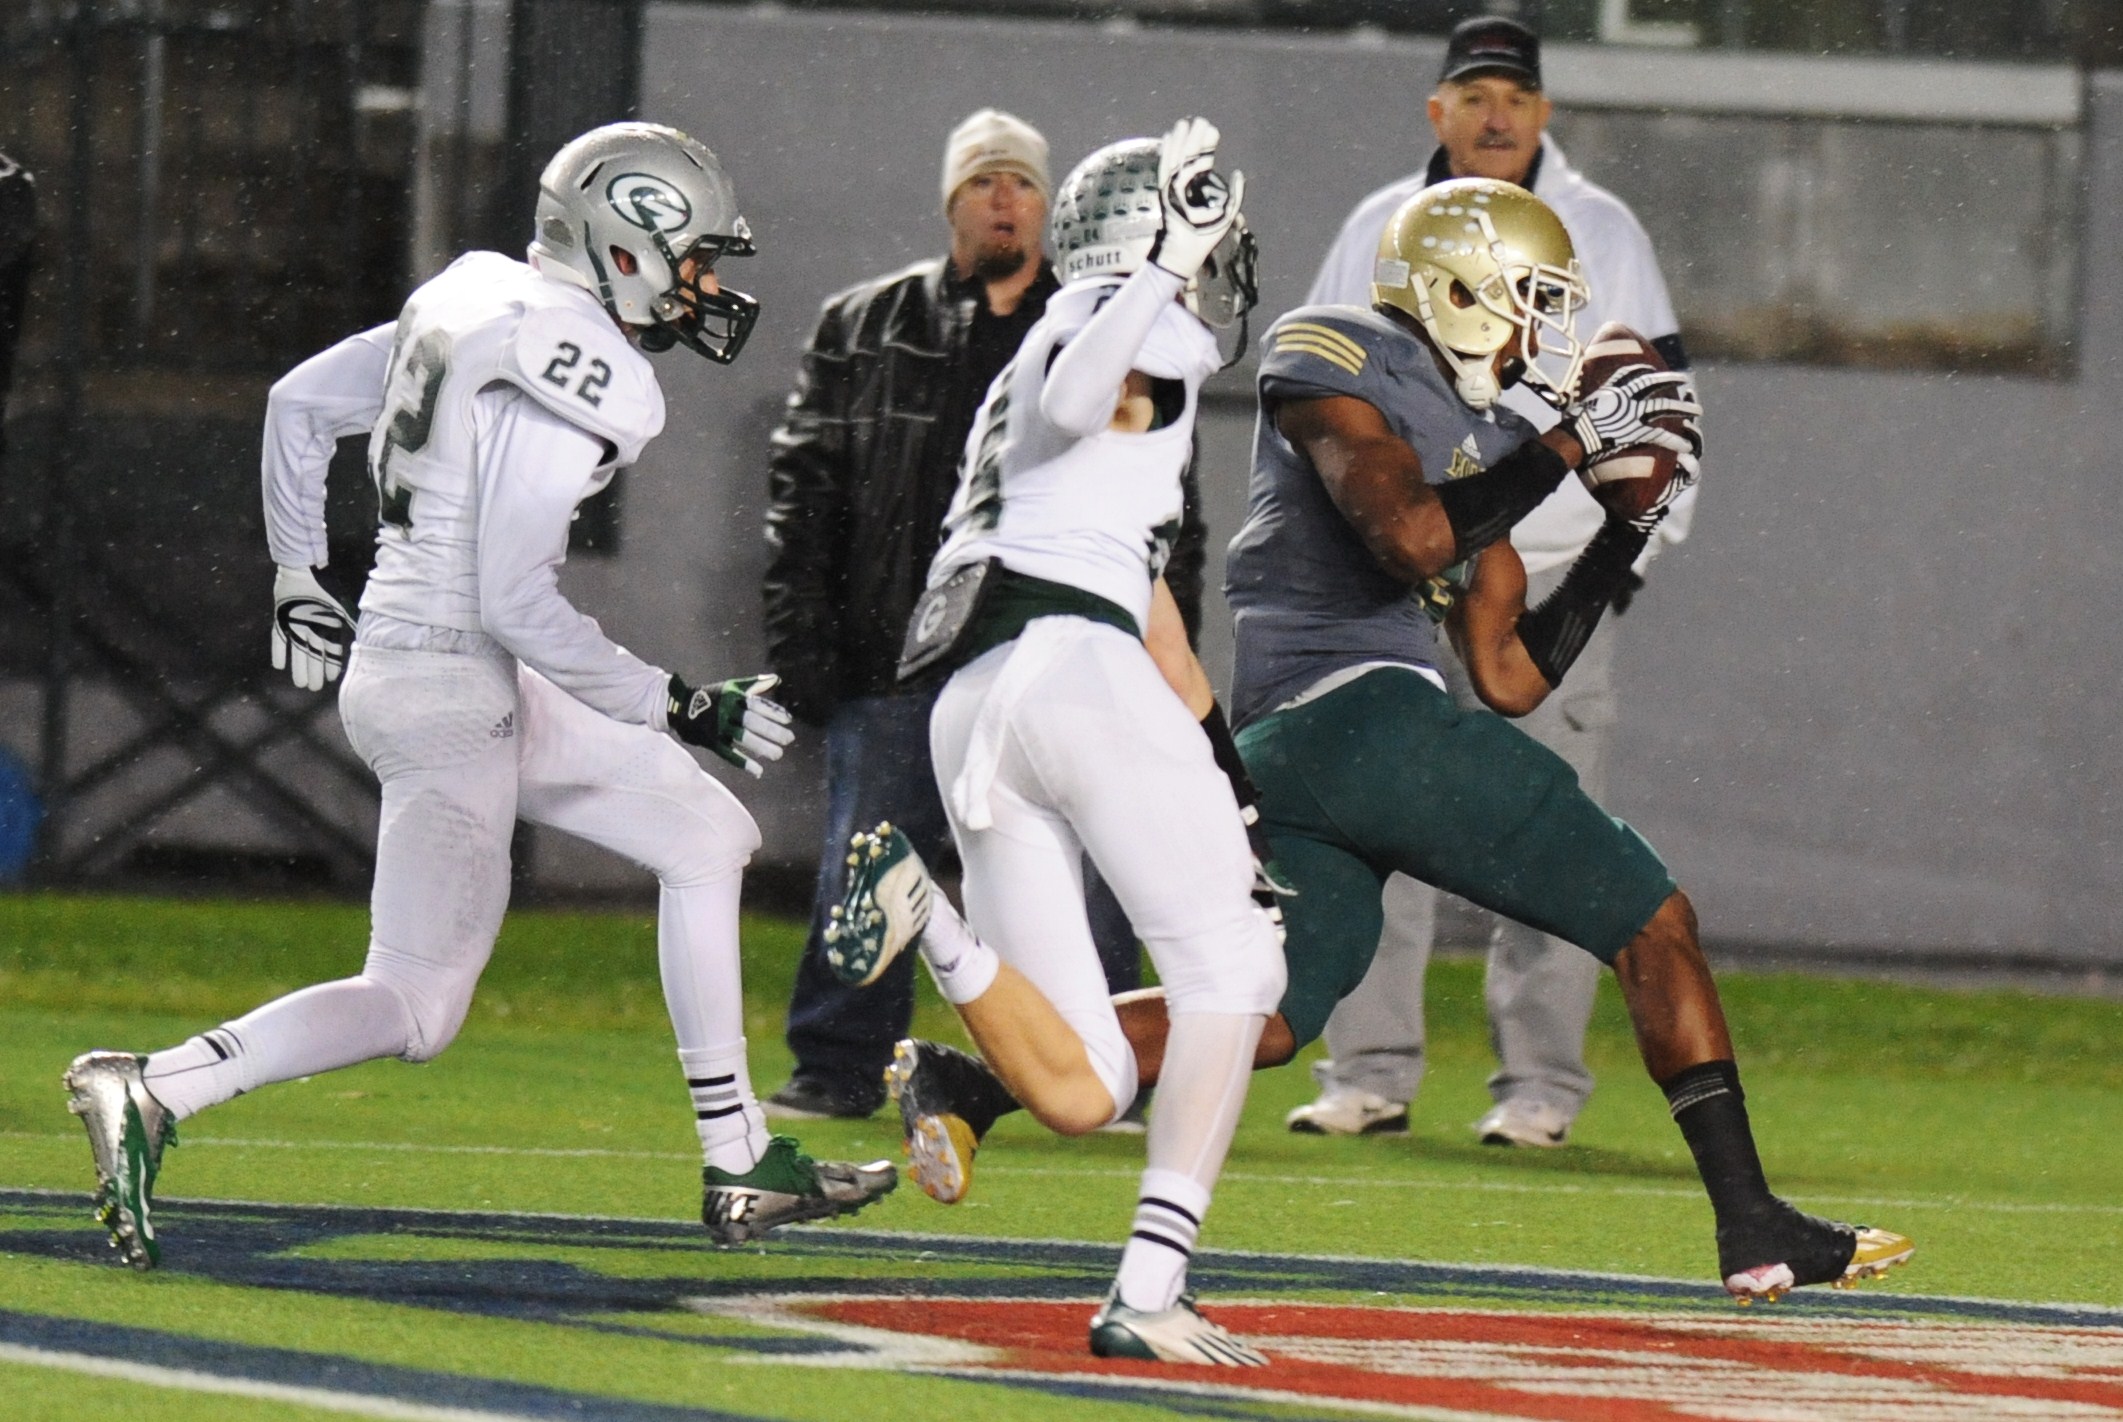 First team all-state multi-purpose player John "JuJu" Smith grabs a touchdown pass for Long Beach Poly in team's loss to Granite Bay in CIF Division I state bowl game. Photo by Scott Kurtz.